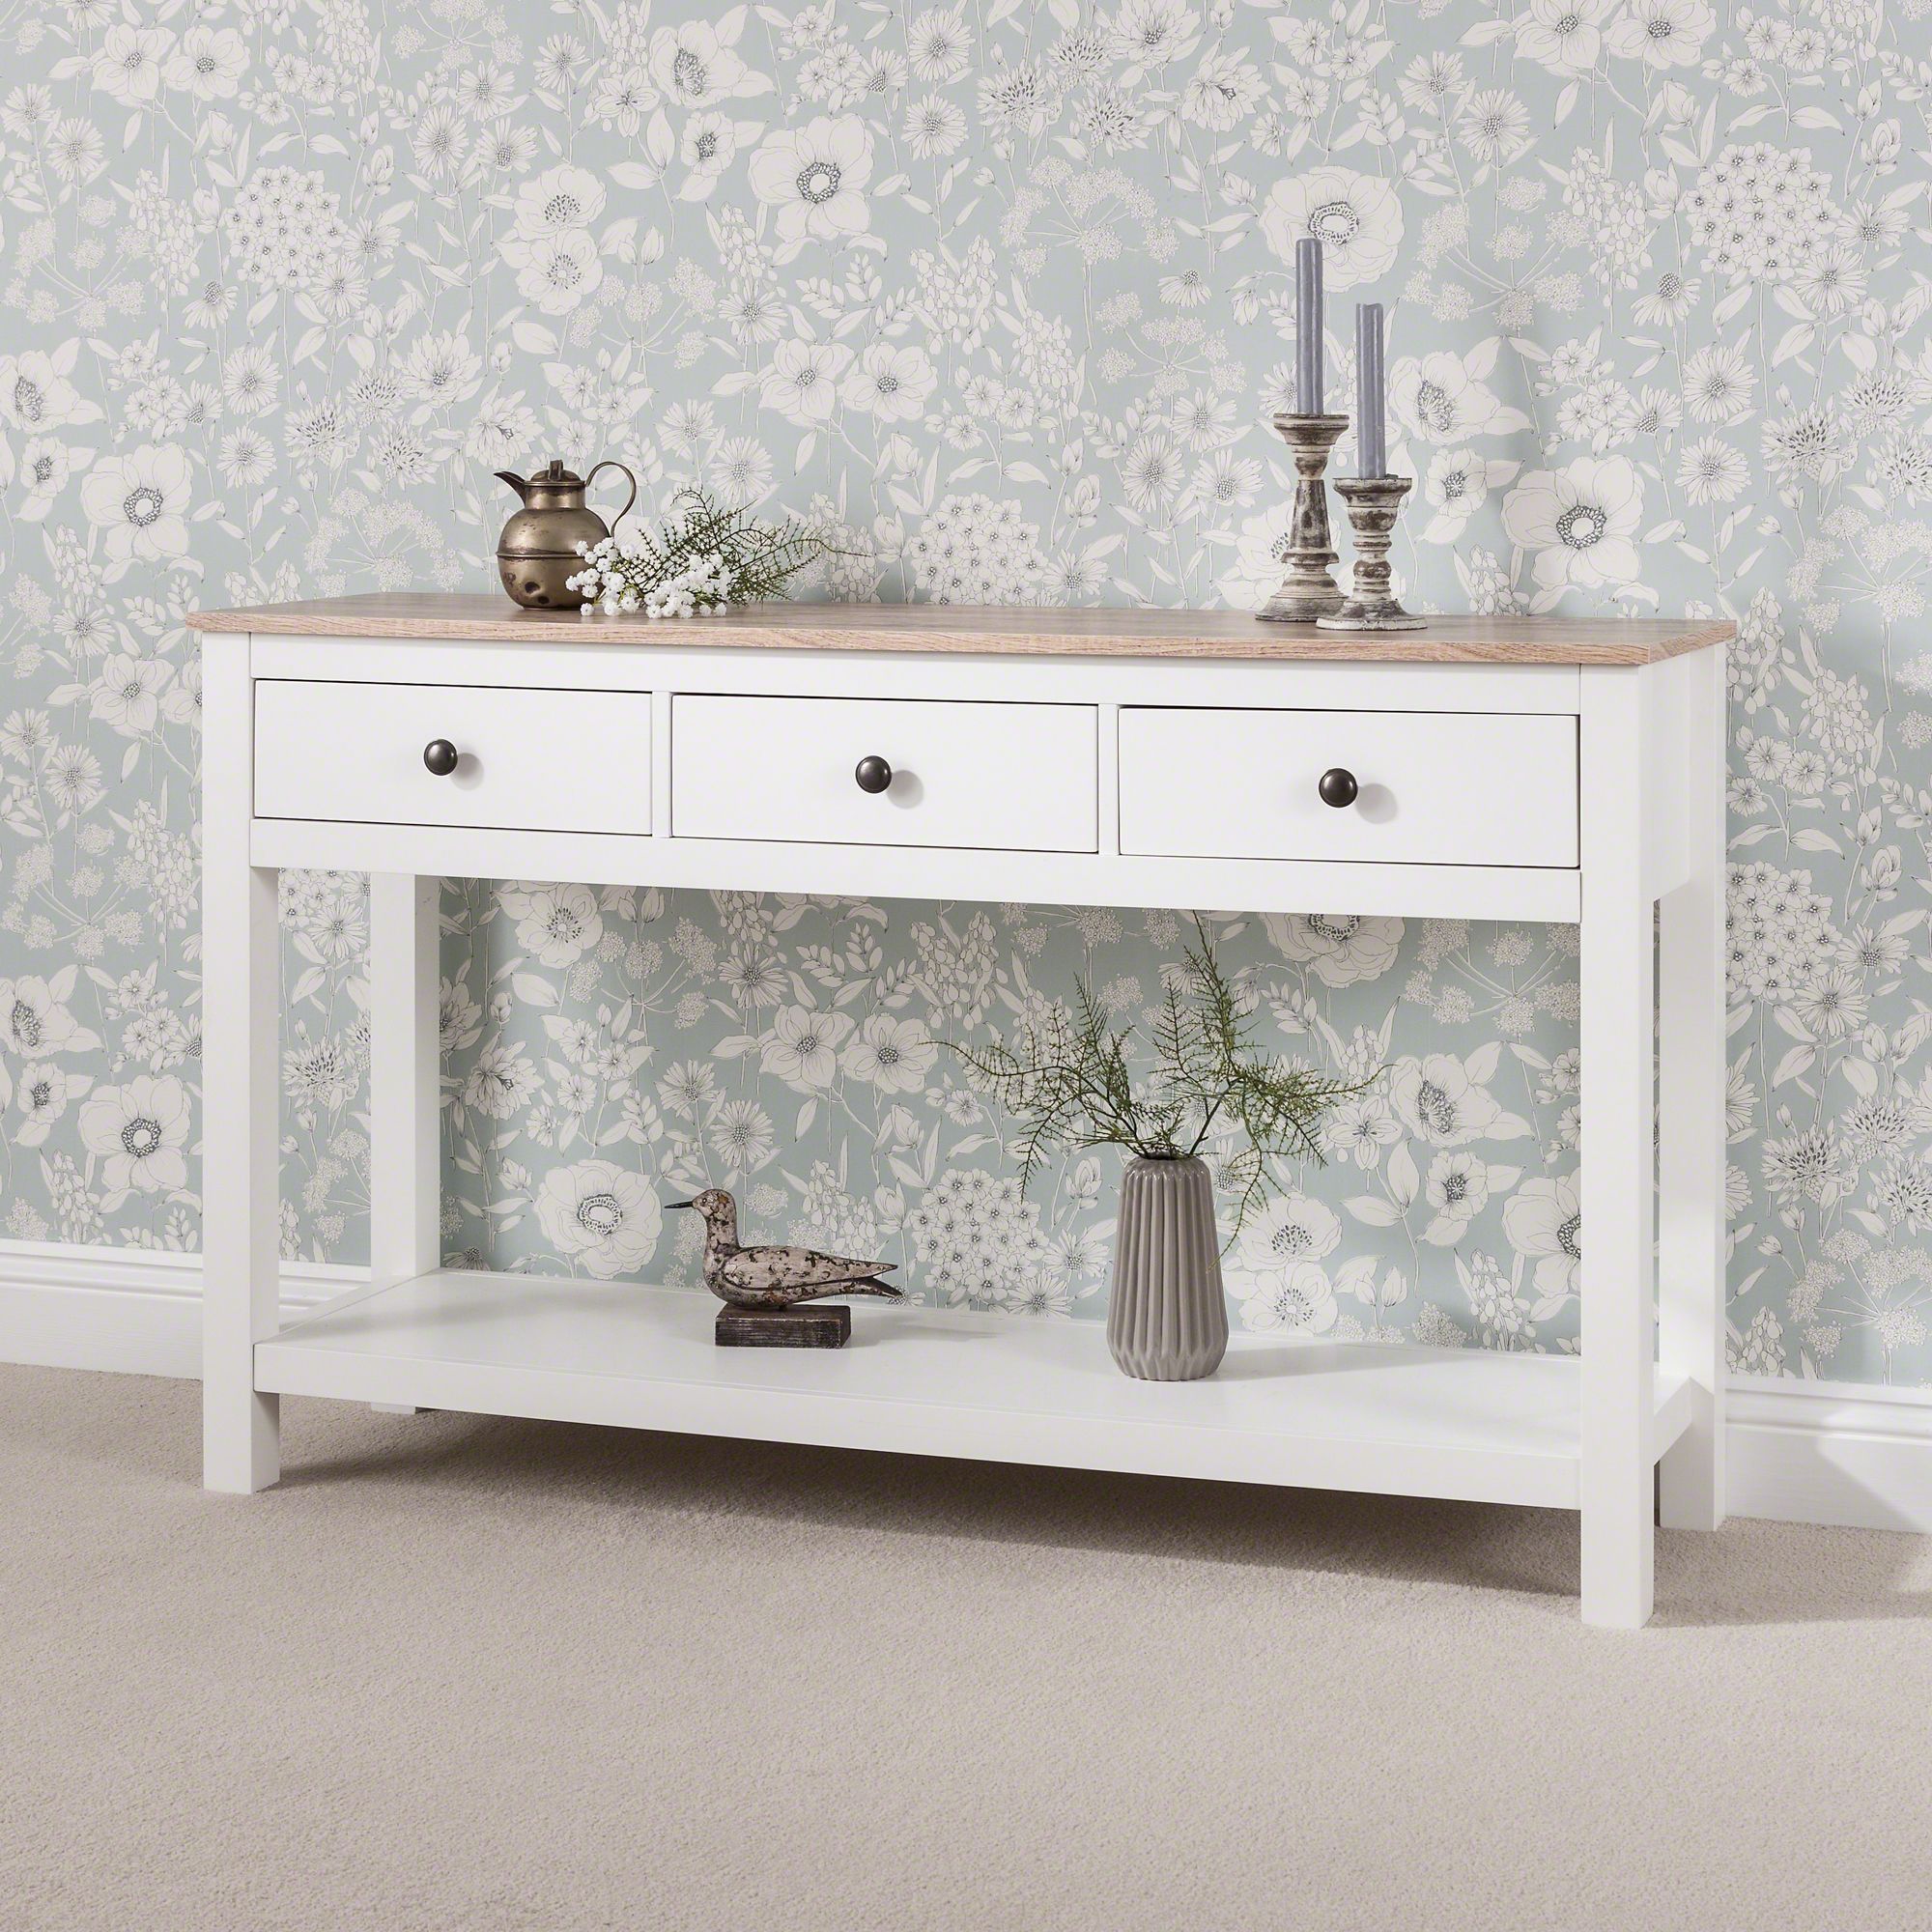 Laura James White Console Table With 2 & 3 Drawers And Shelf | Ebay With White Geometric Console Tables (View 2 of 20)